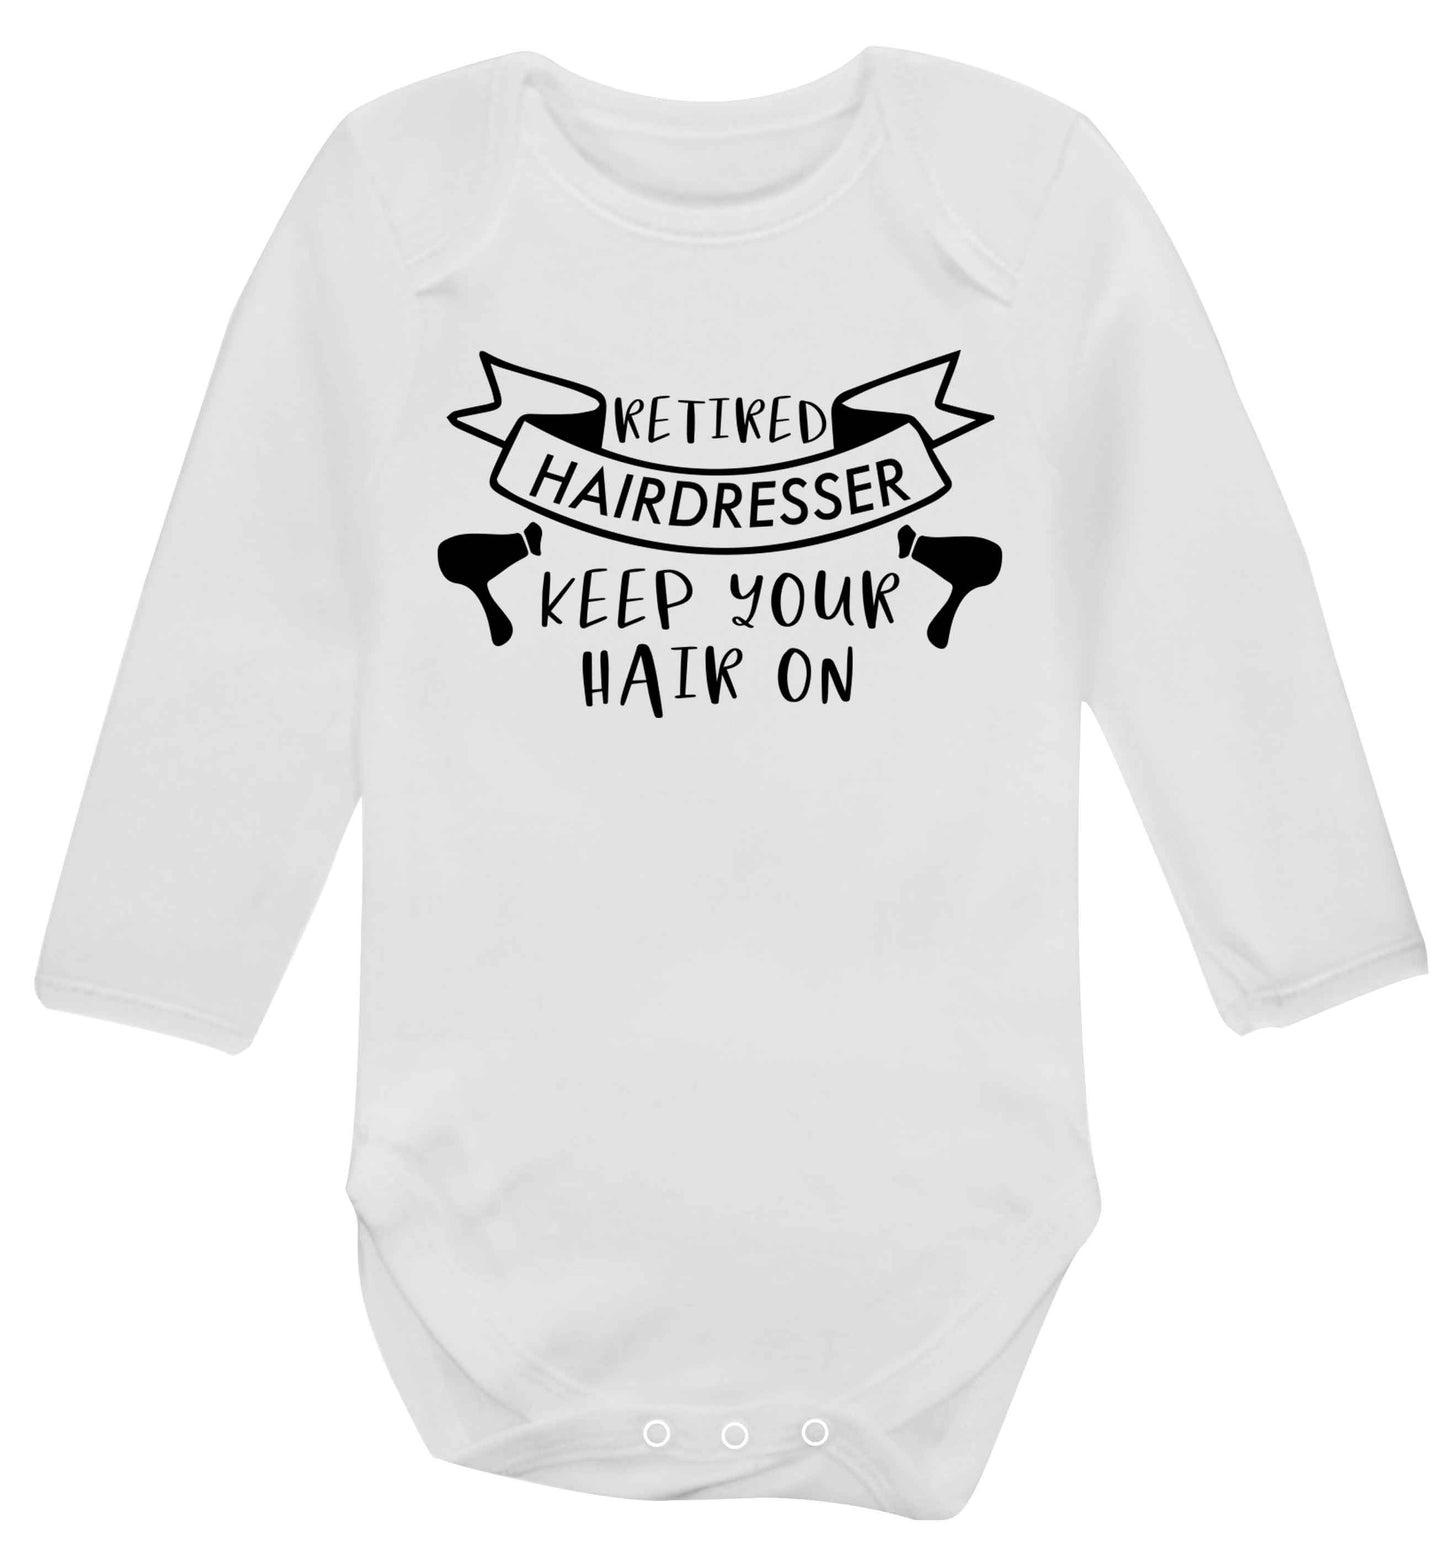 Retired hairdresser keep your hair on Baby Vest long sleeved white 6-12 months